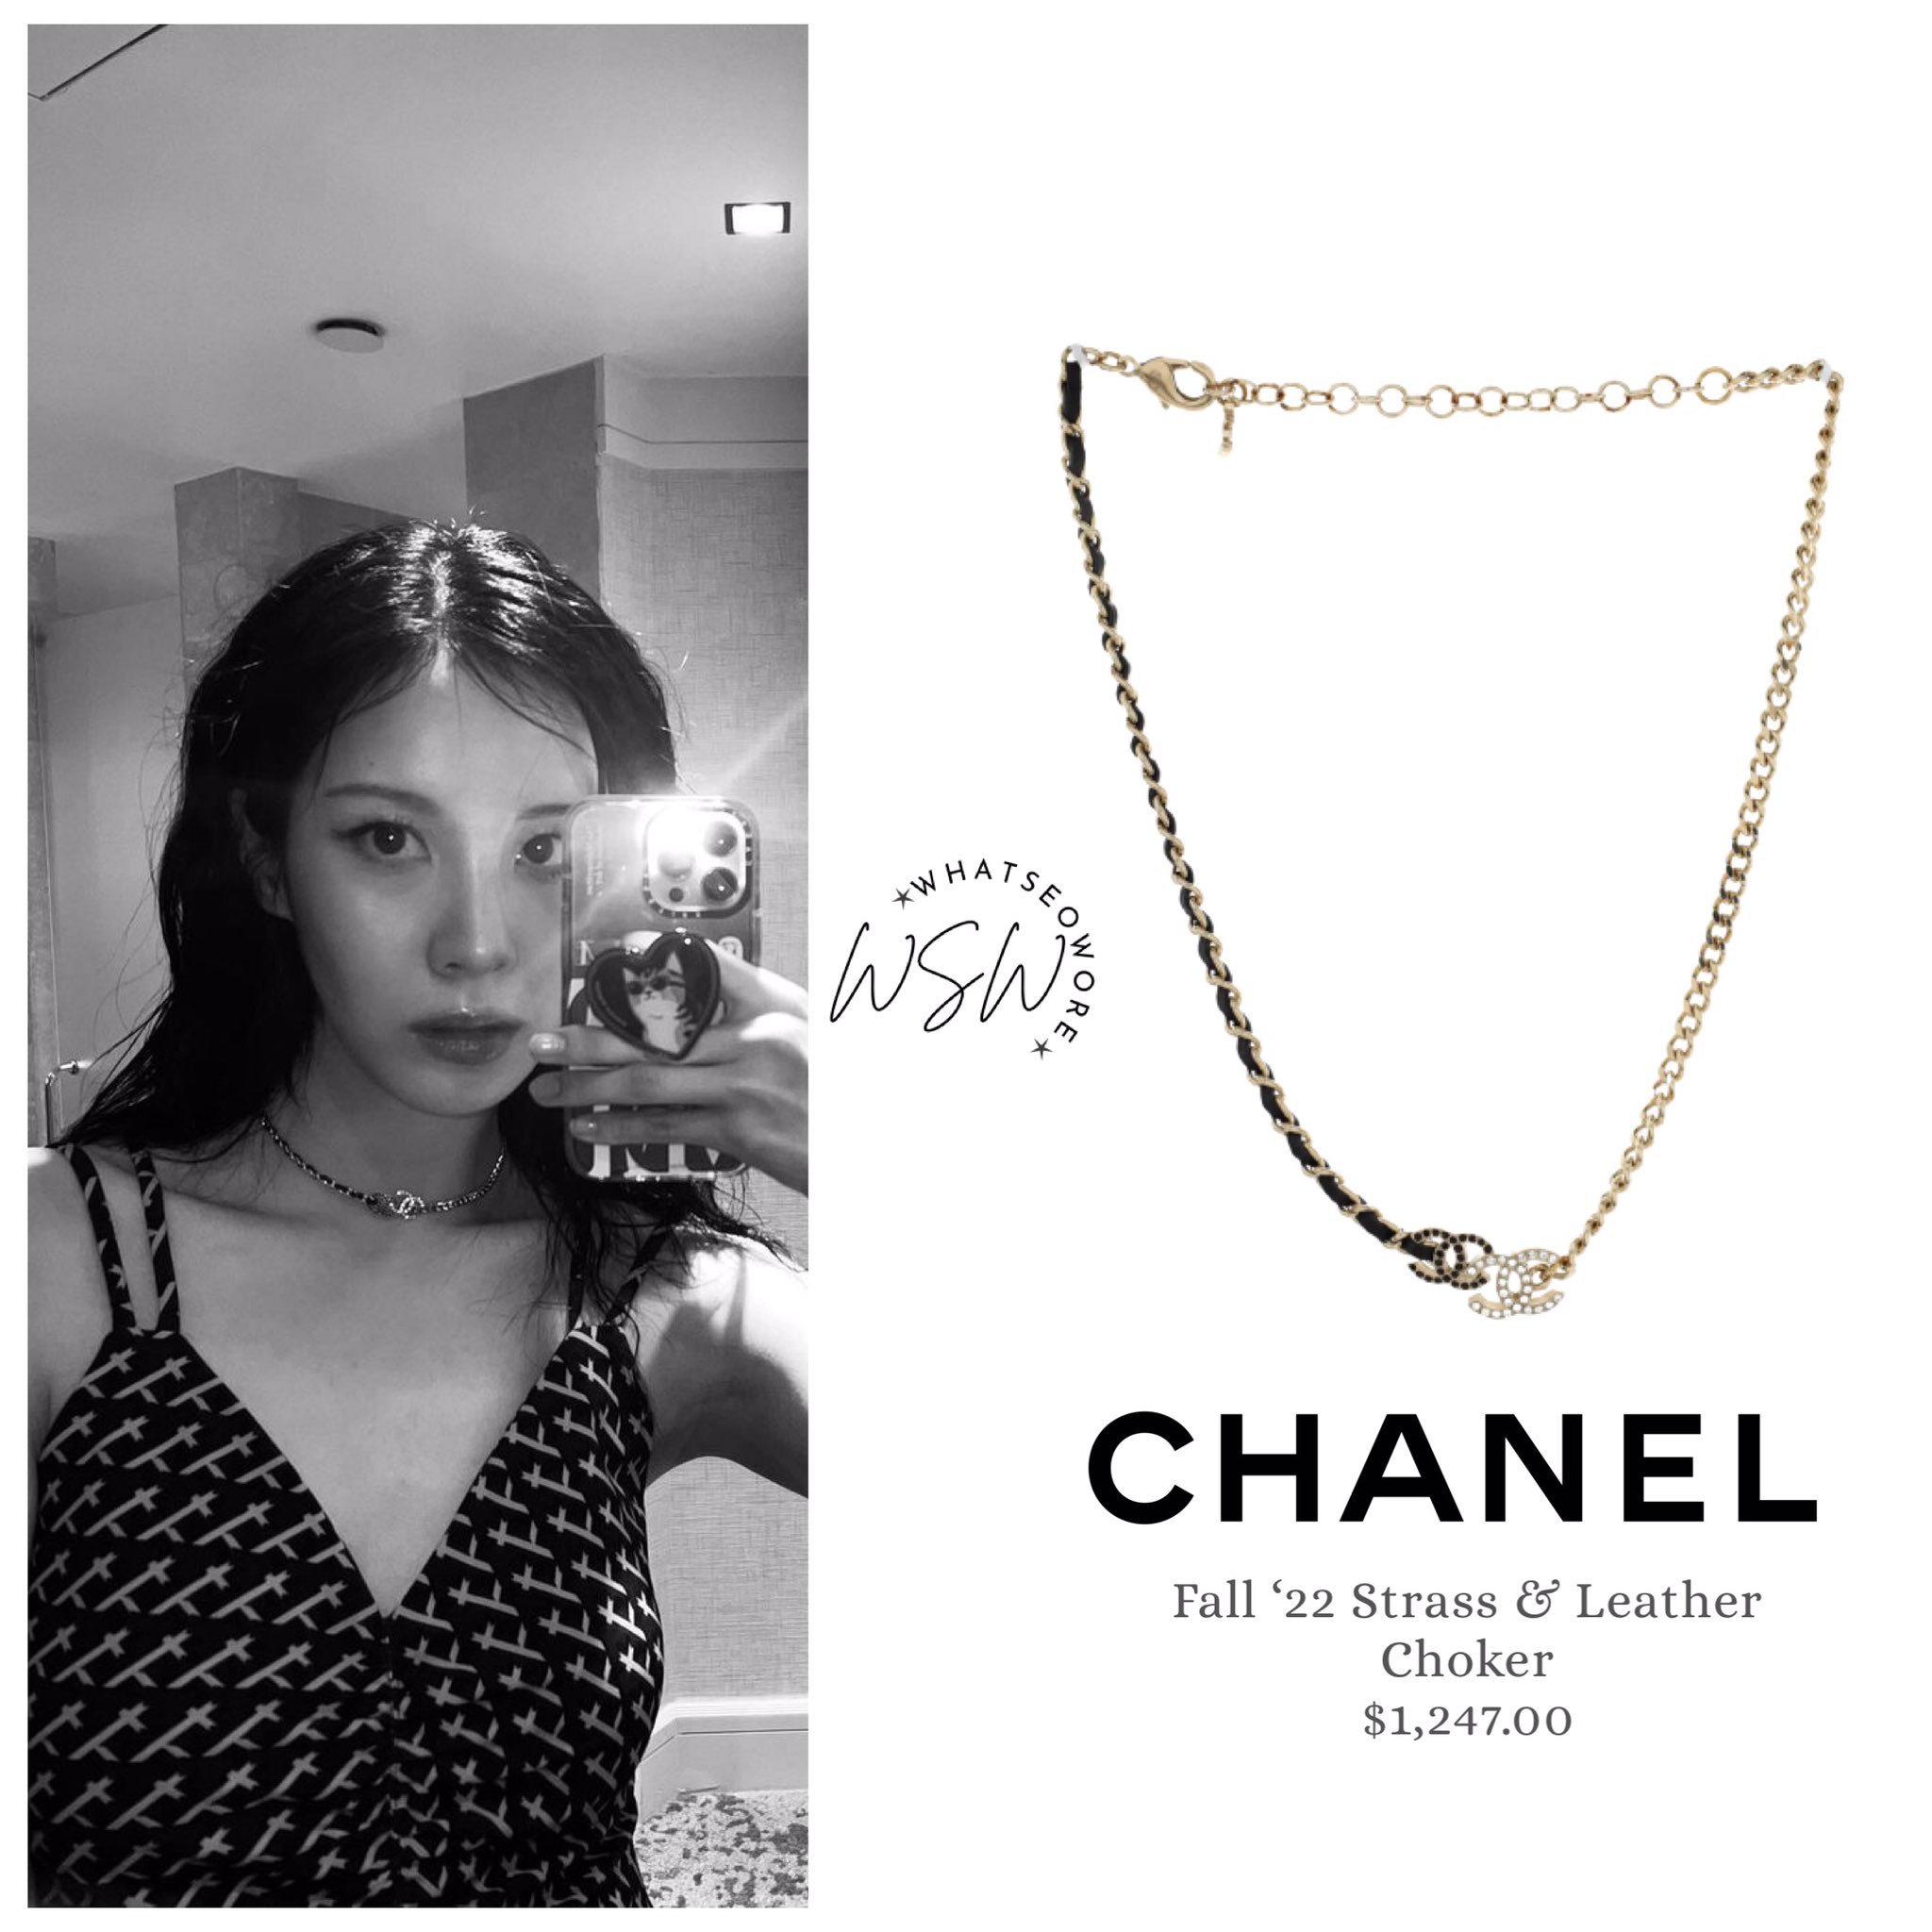 𝐰𝐡𝐚𝐭𝐬𝐞𝐨𝐰𝐨𝐫𝐞 on X: • Chanel Fall '22 Strass & Leather